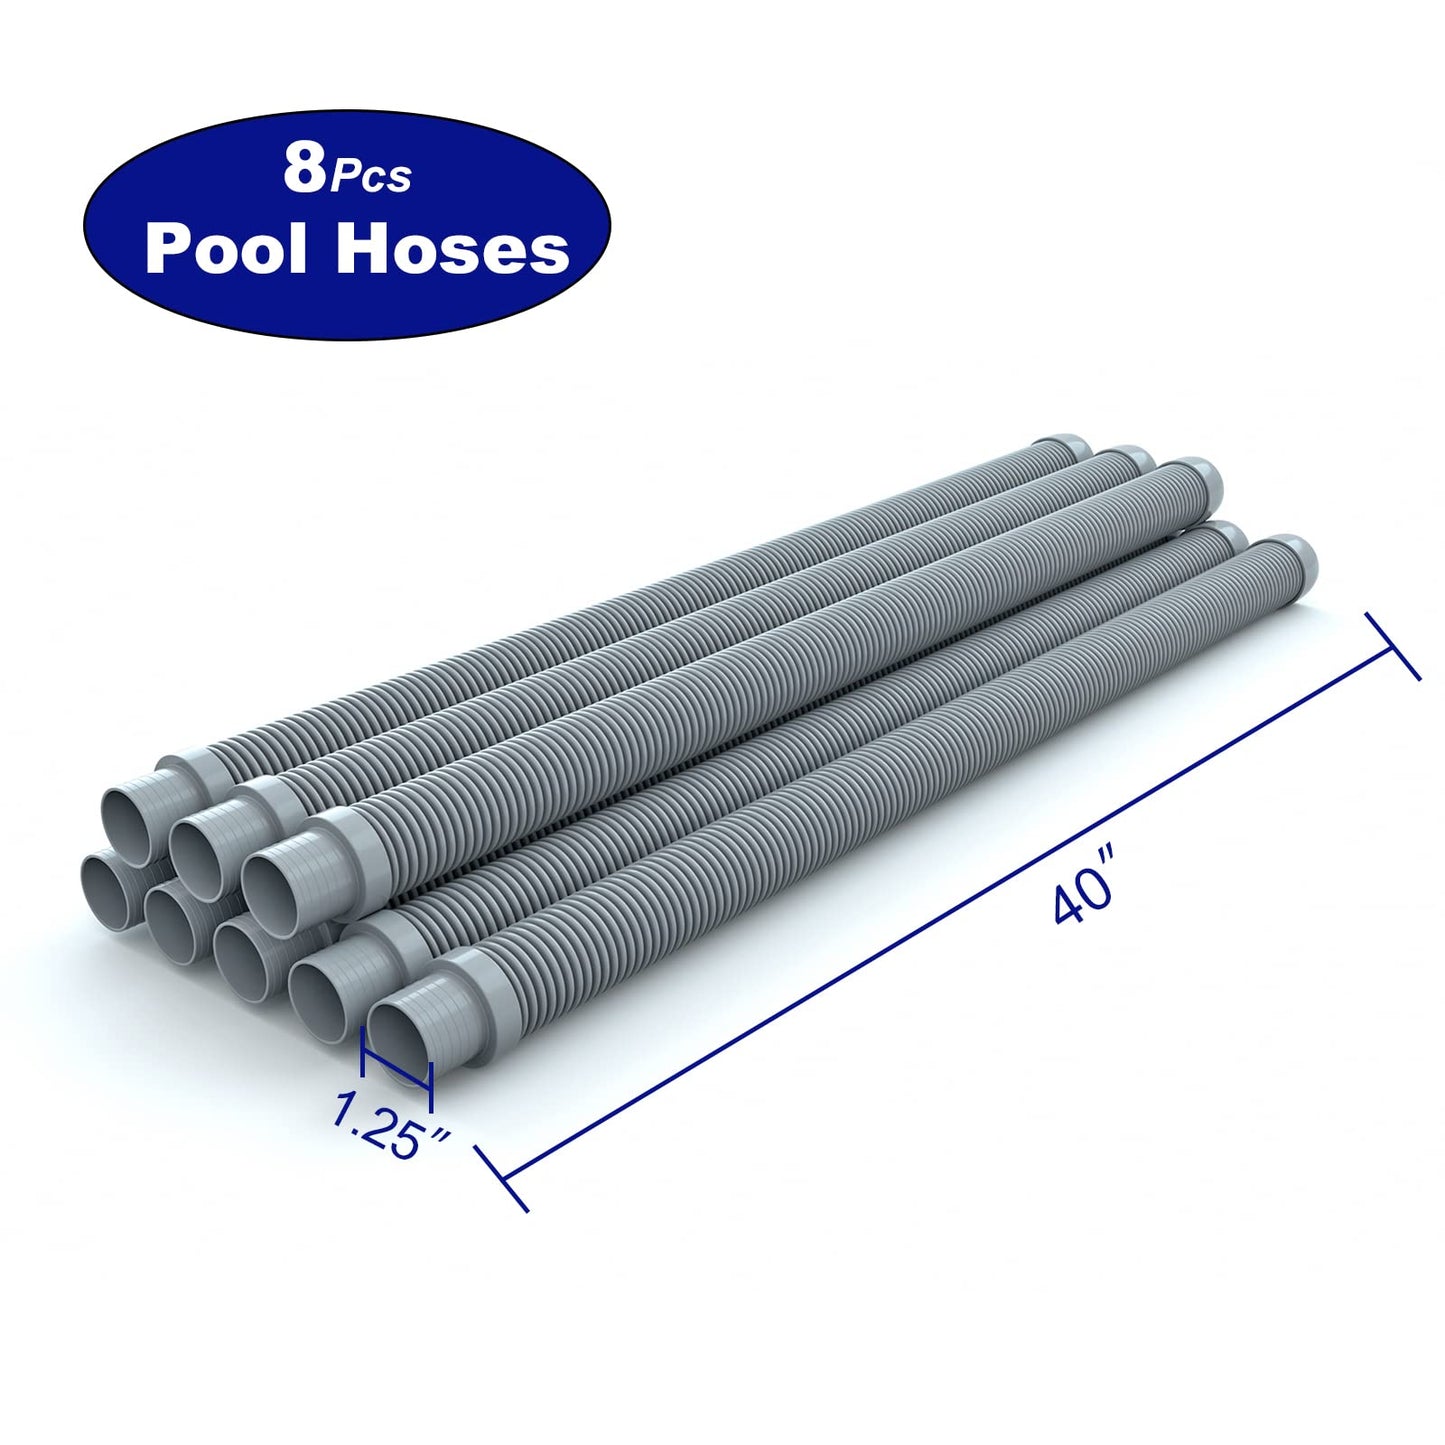 Poolvio Professional Swimming Pool Vacuum Cleaner Hose -1.5” 8 Piece Hoses for Pool Vacuum Extension/Replacement - Compatible with all Major Automatic Swimming Pool Cleaners